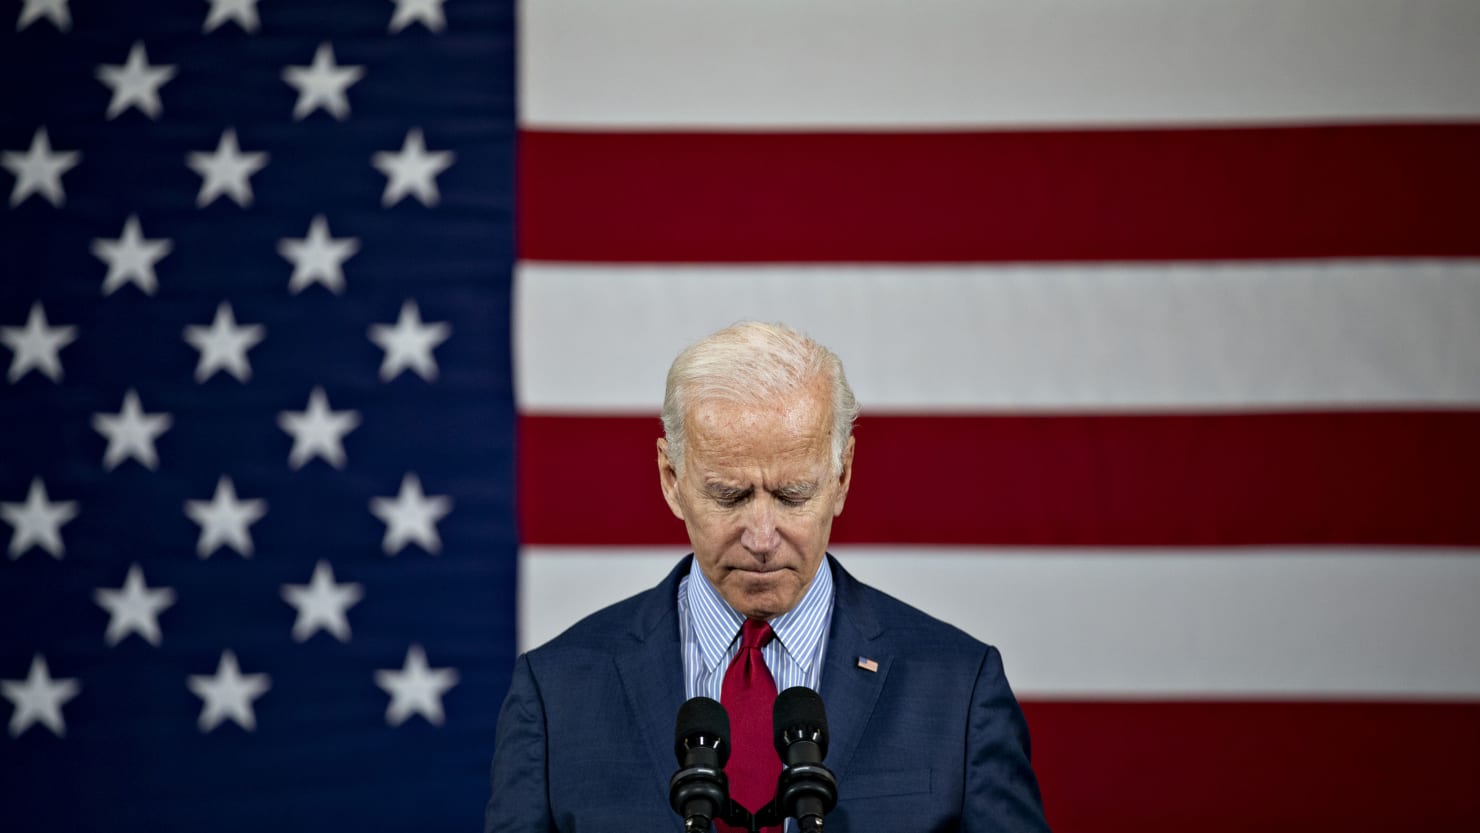 Biden’s air strike in Syria is not a return to Trump’s recklessness in Iran and Iraq